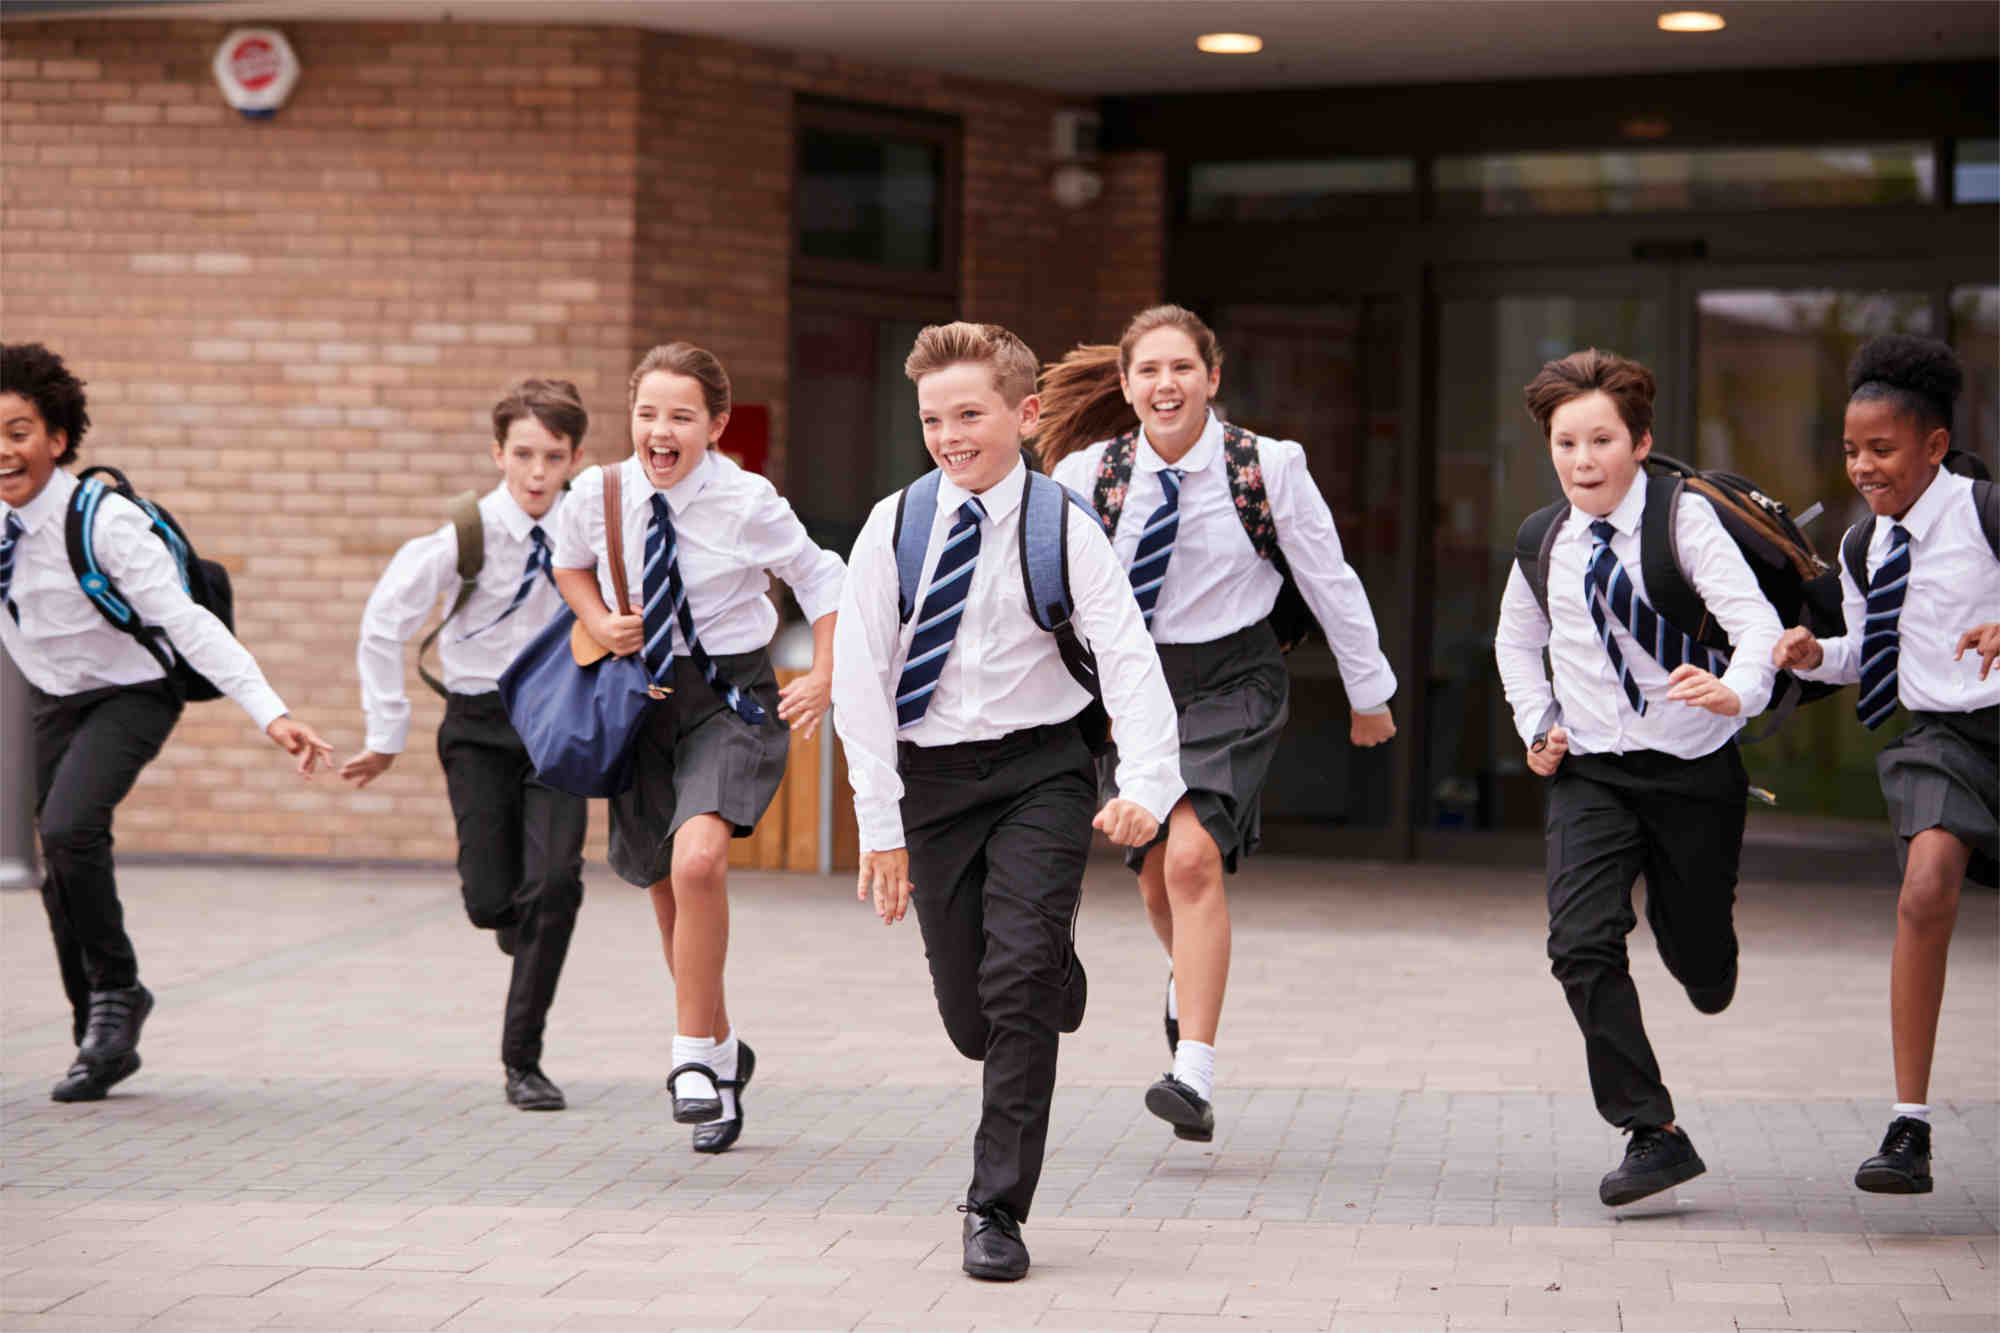 Seven children with their schoolbags in school uniform running out of school entrance looking very happy - Footsteps Educational Psychology services for schools